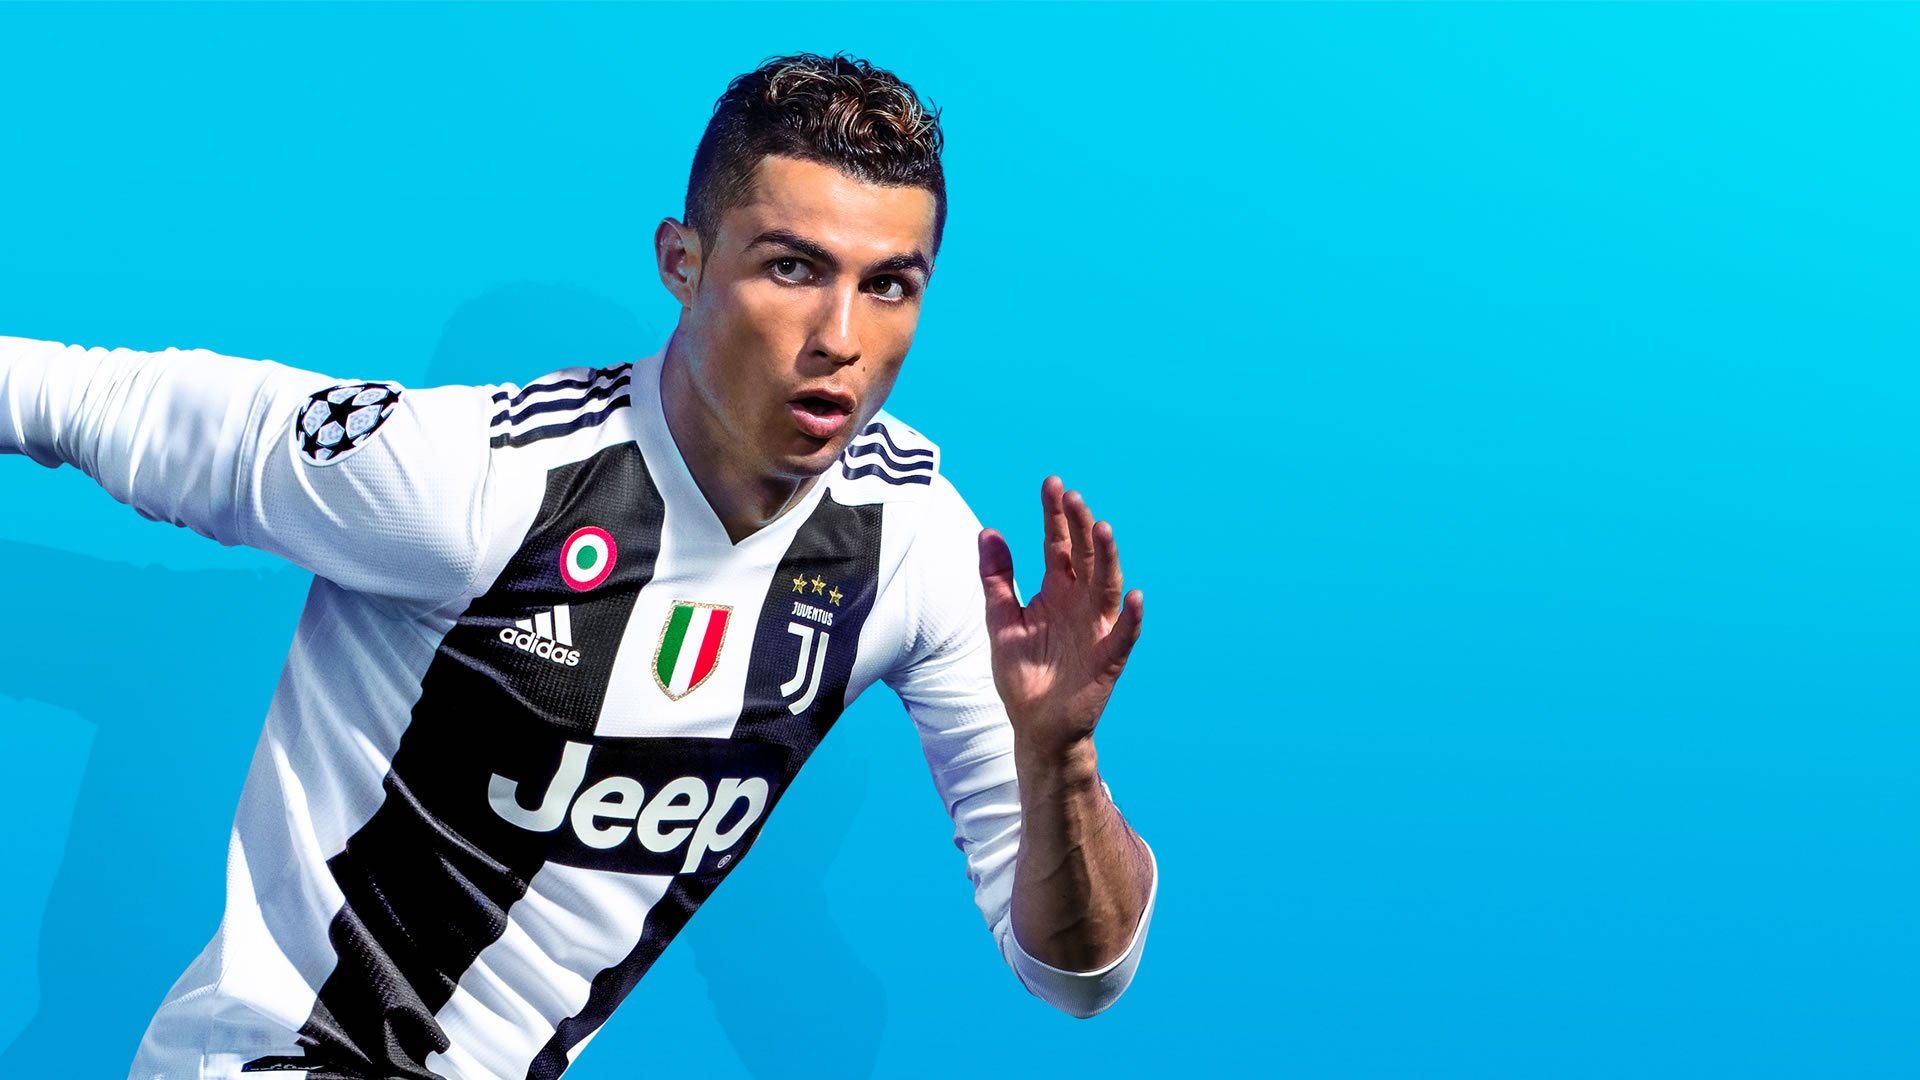 Top 100 FIFA 19 Players Revealed in Full, Arguments Erupt